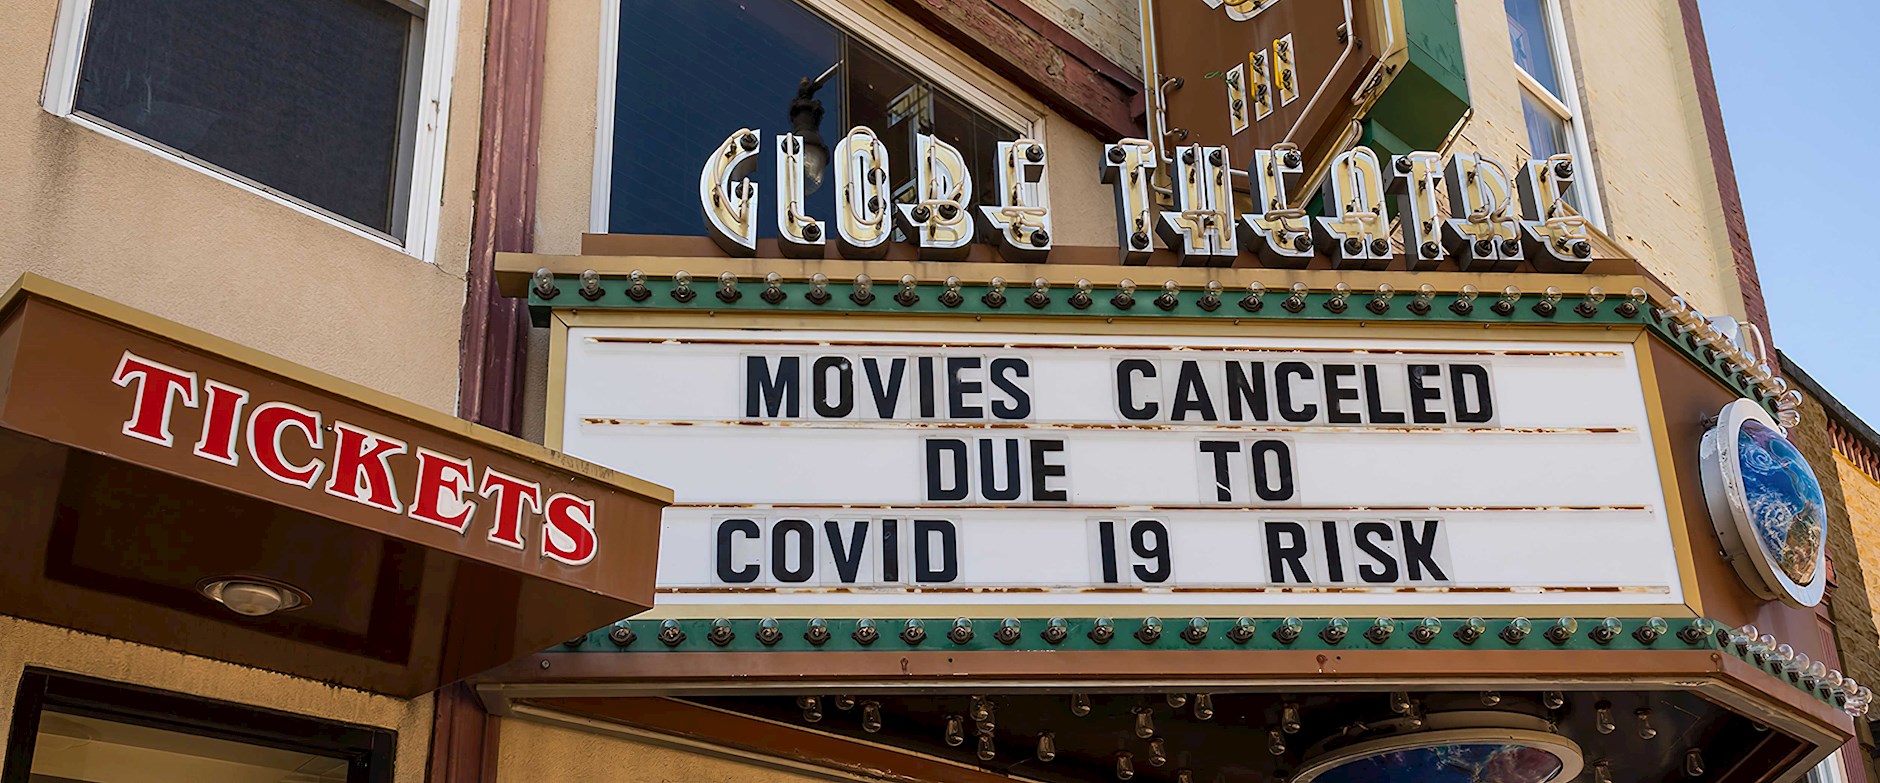 Movie marquee that says "Movies cancelled due to covid 19 risk"